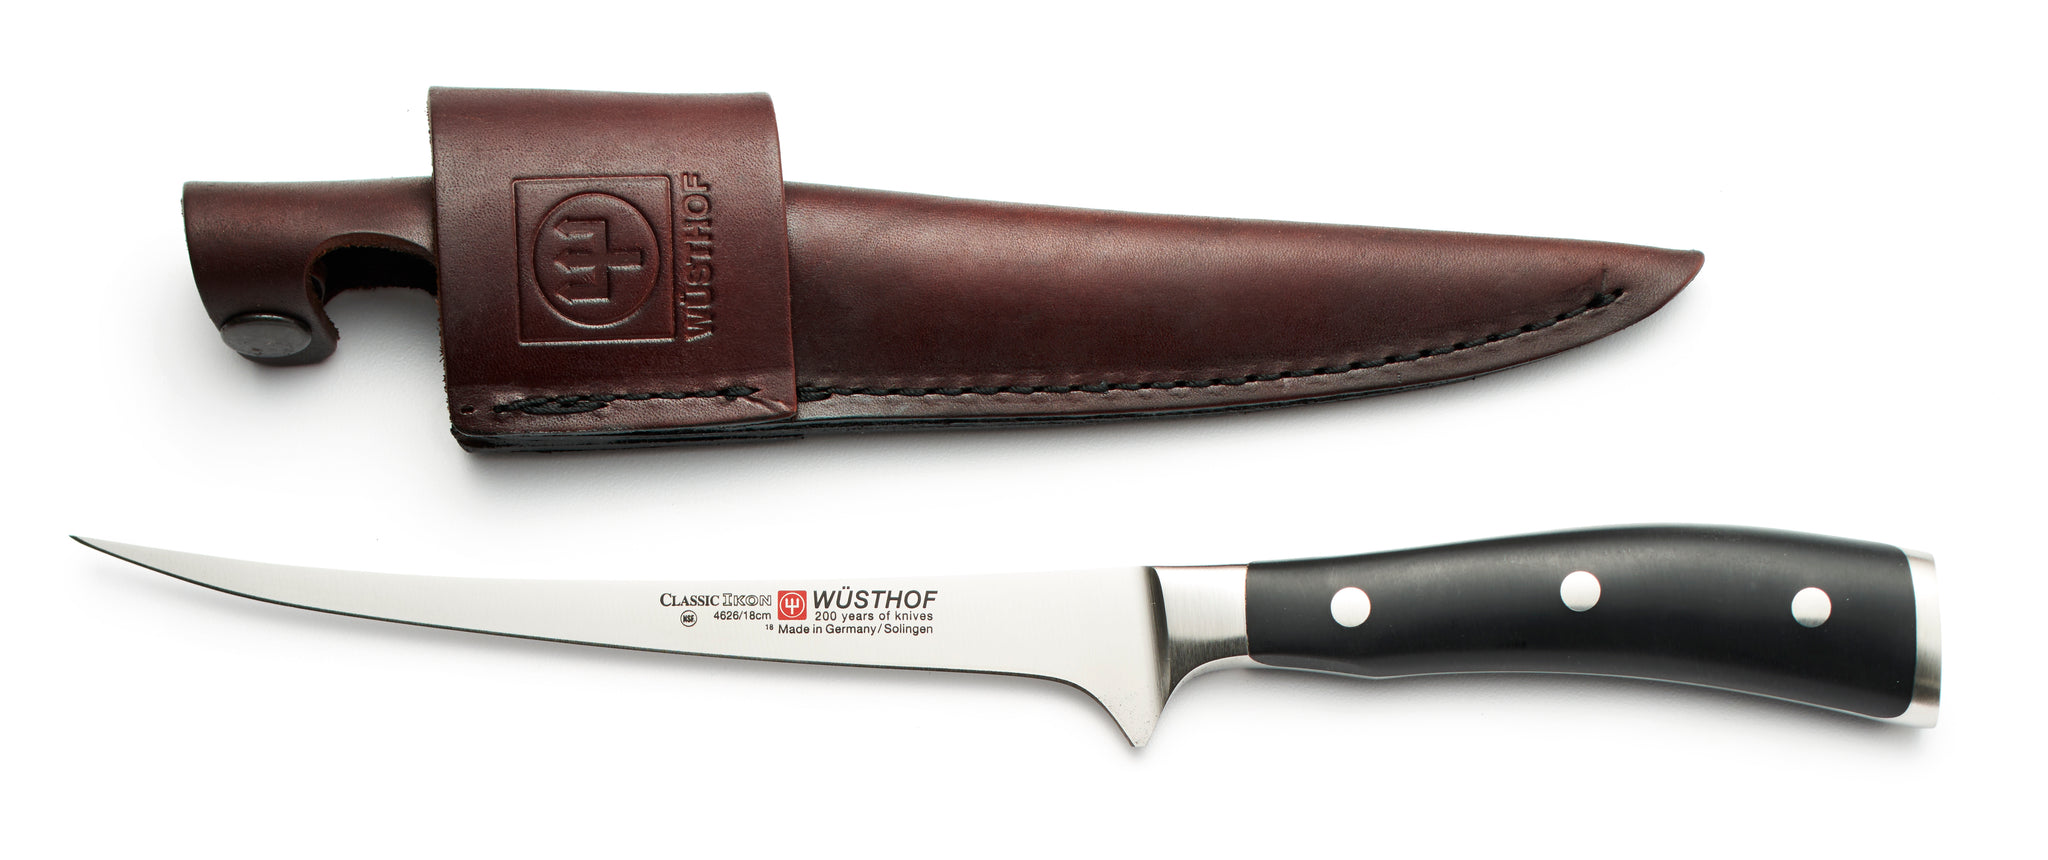 4626WS wusthof classic ikon 7 inch fillet knife with leather sheath